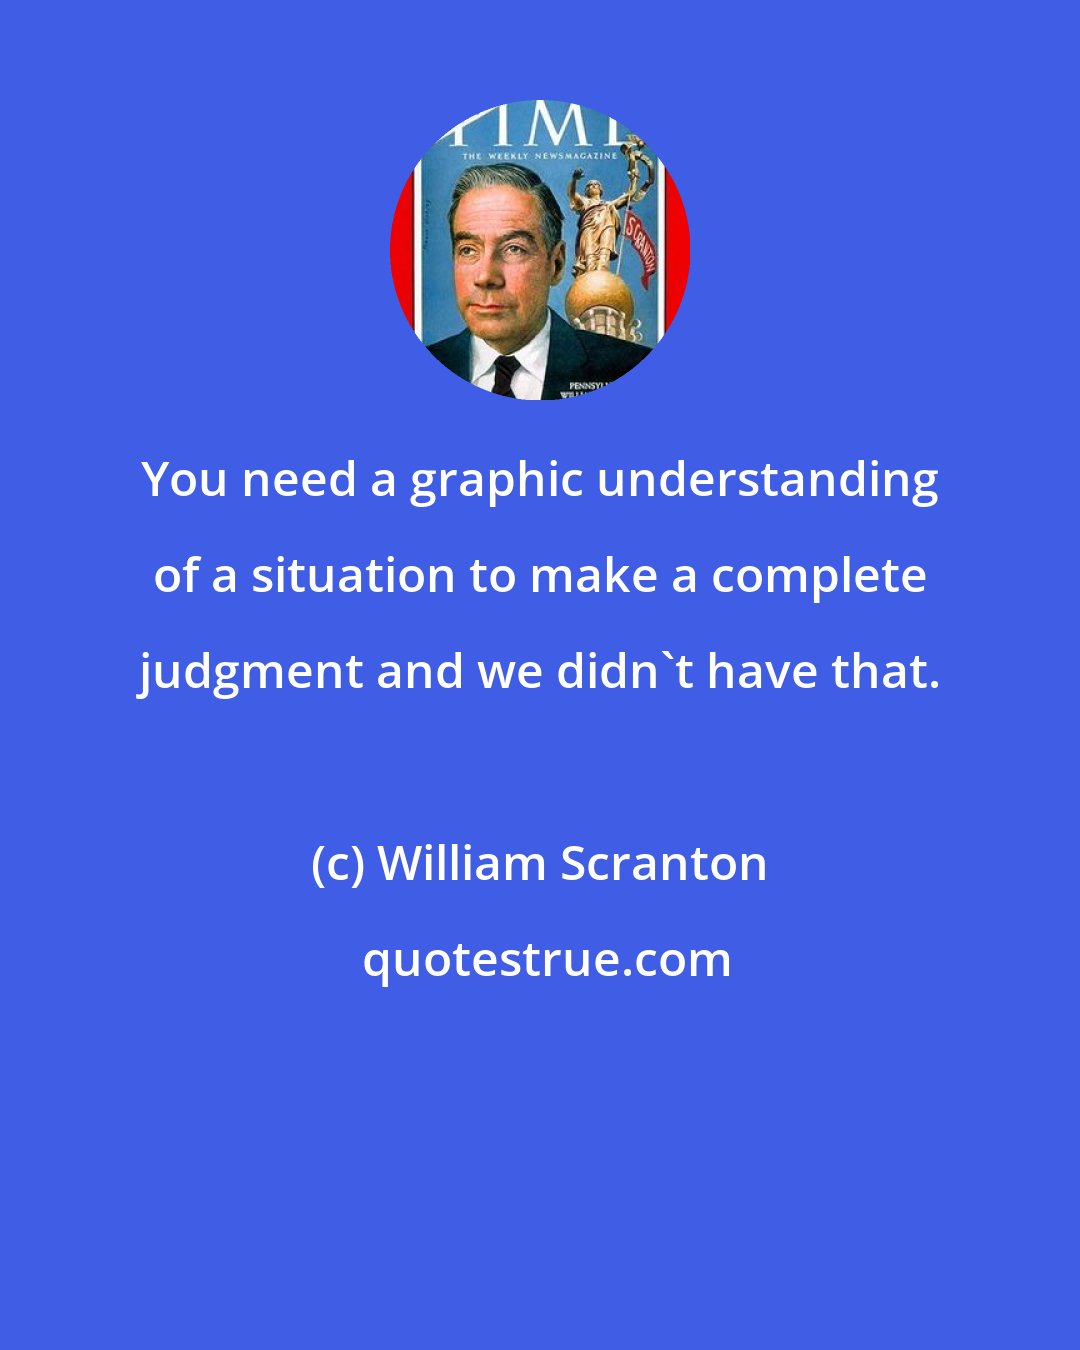 William Scranton: You need a graphic understanding of a situation to make a complete judgment and we didn't have that.